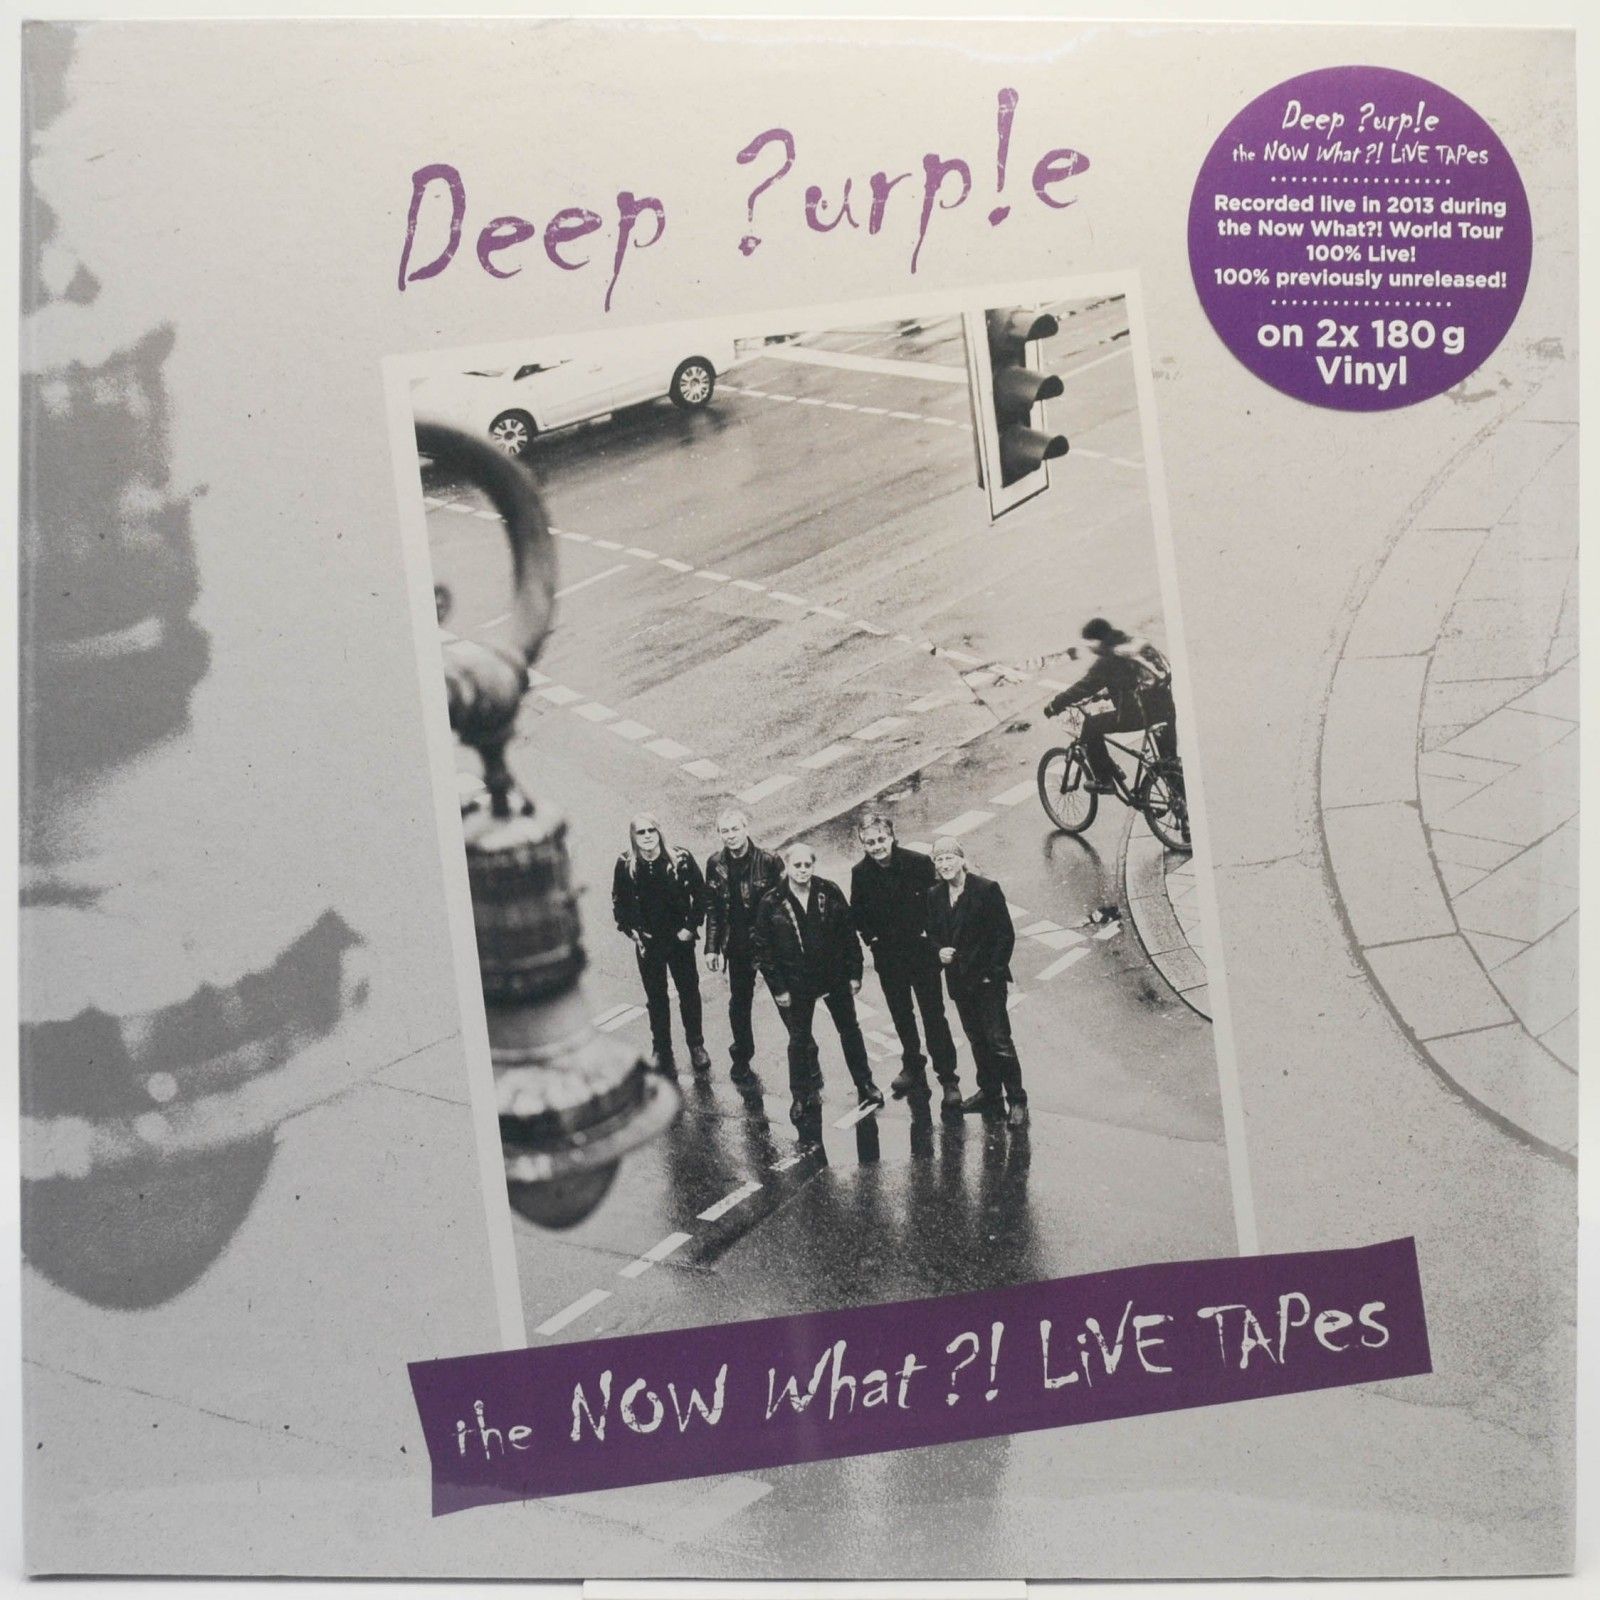 Deep Purple — The Now What?! Live Tapes (2LP), 2013